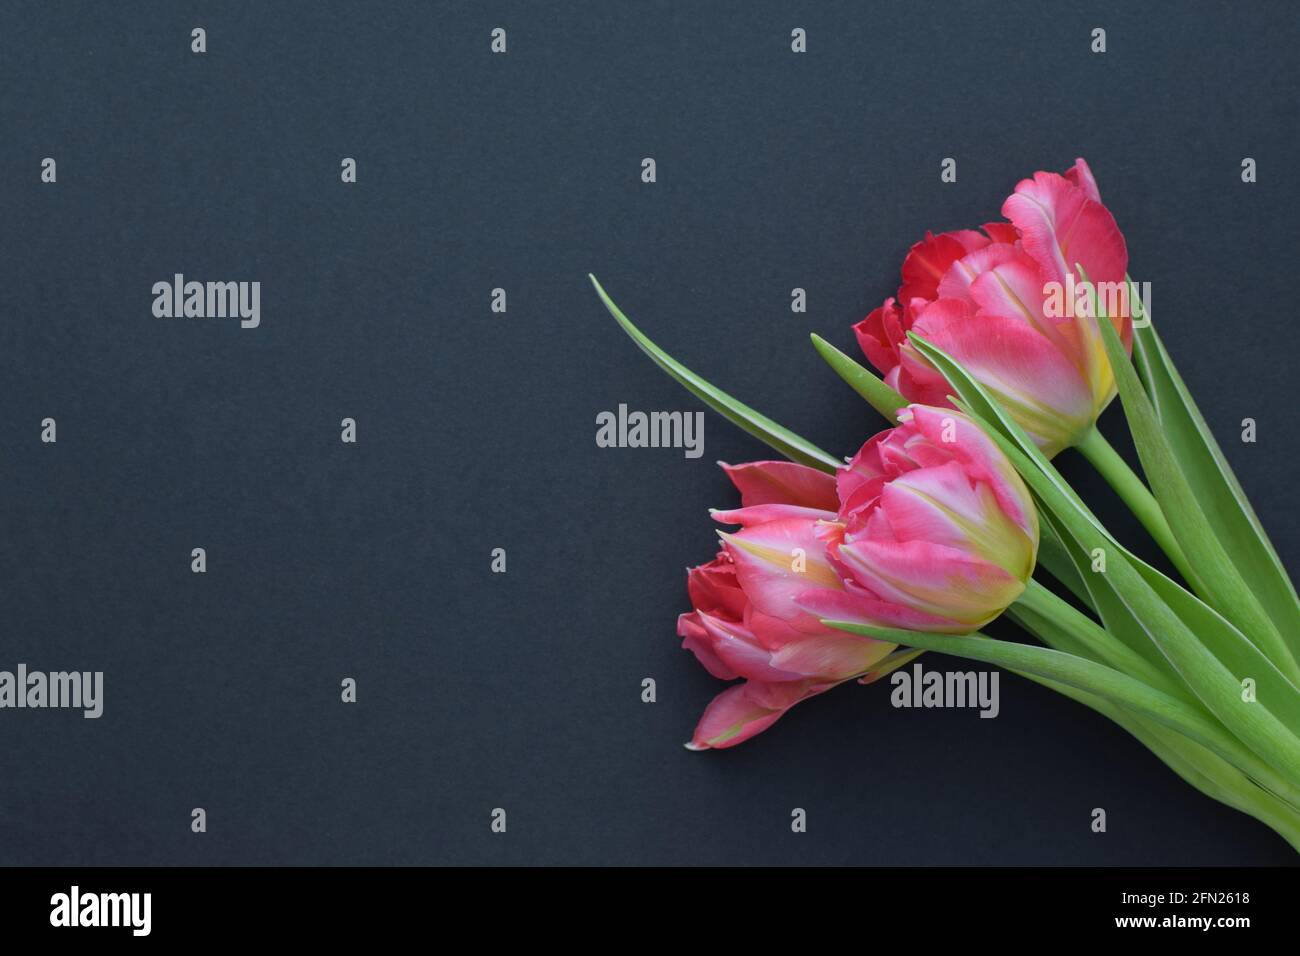 Bouquet of pink tulips with green leaves on a dark background. Floral background. Copy space Stock Photo